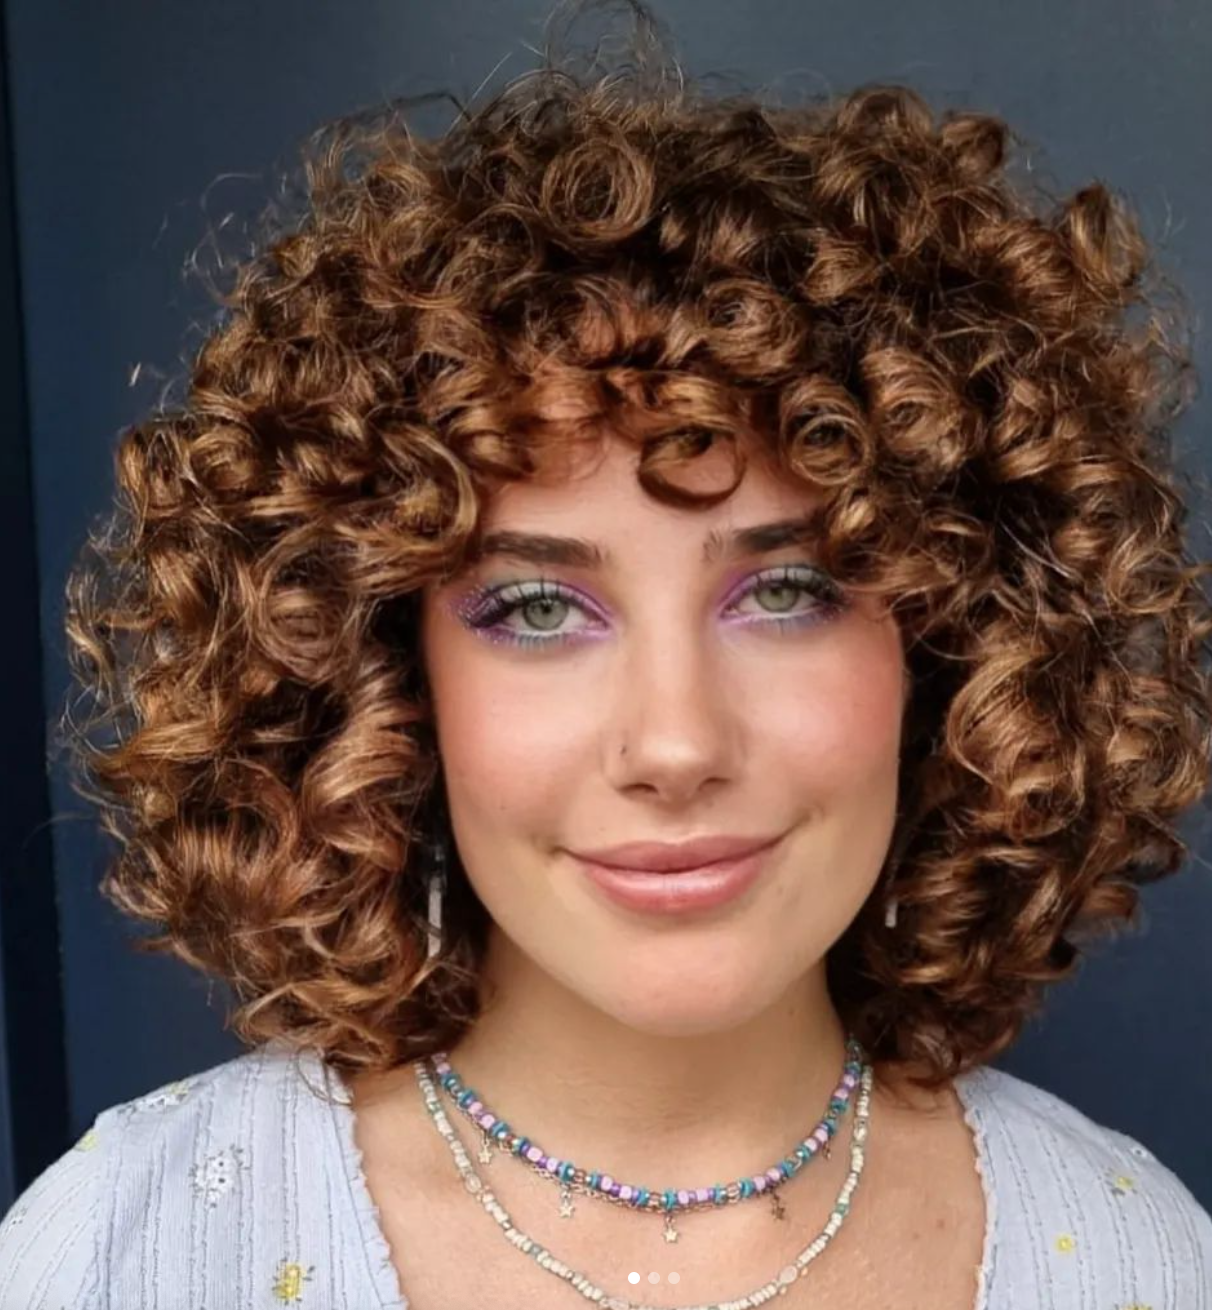 A woman with curly brown hair and purple eyeshadow smiles. 